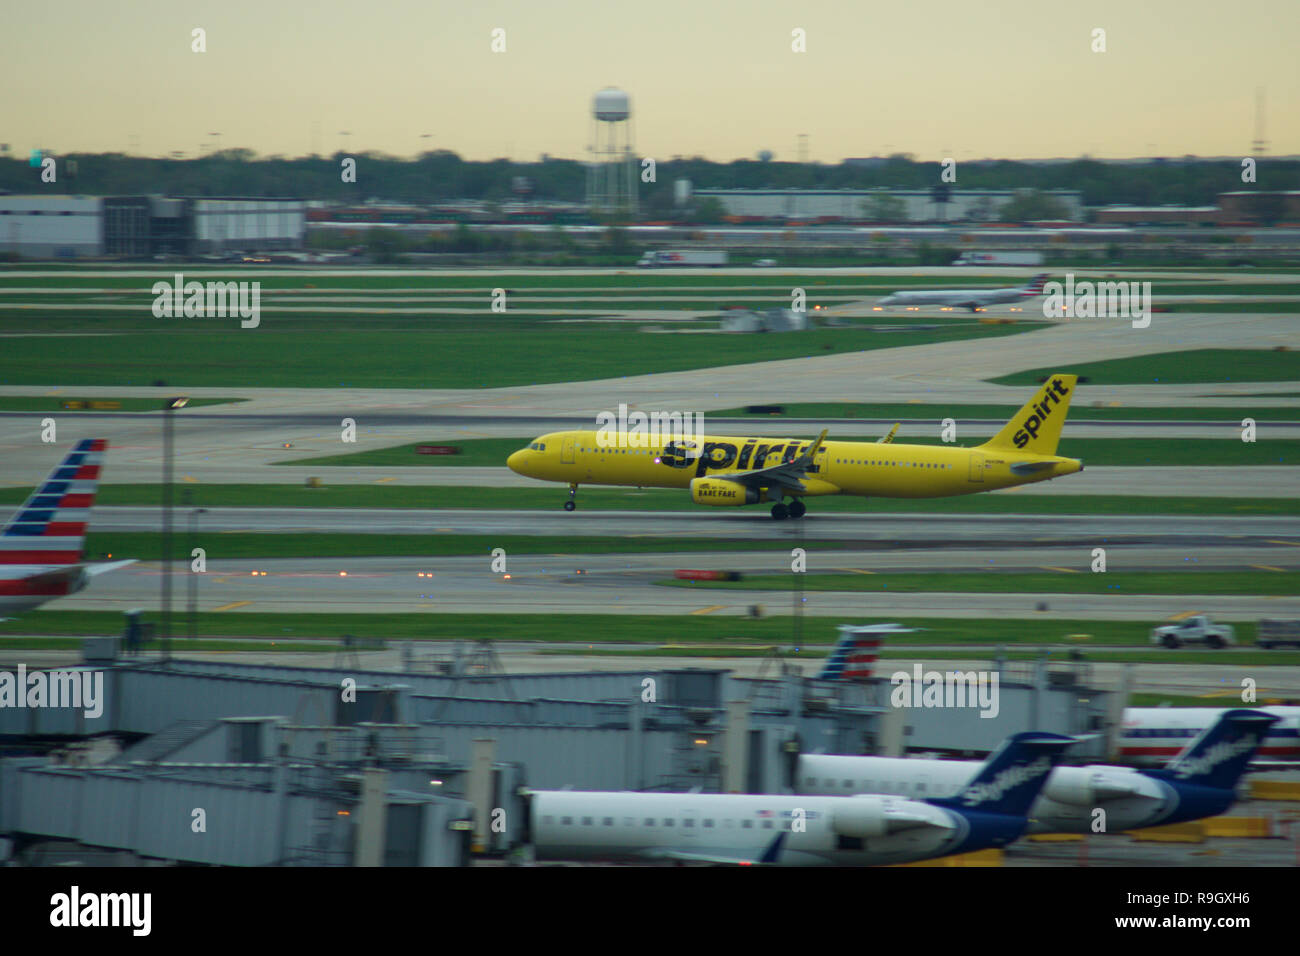 CHICAGO, ILLINOIS, UNITED STATES - MAY 11th, 2018:A Spirit Airlines Airbus A320 at O'Hare International Airport before takeoff. Stock Photo